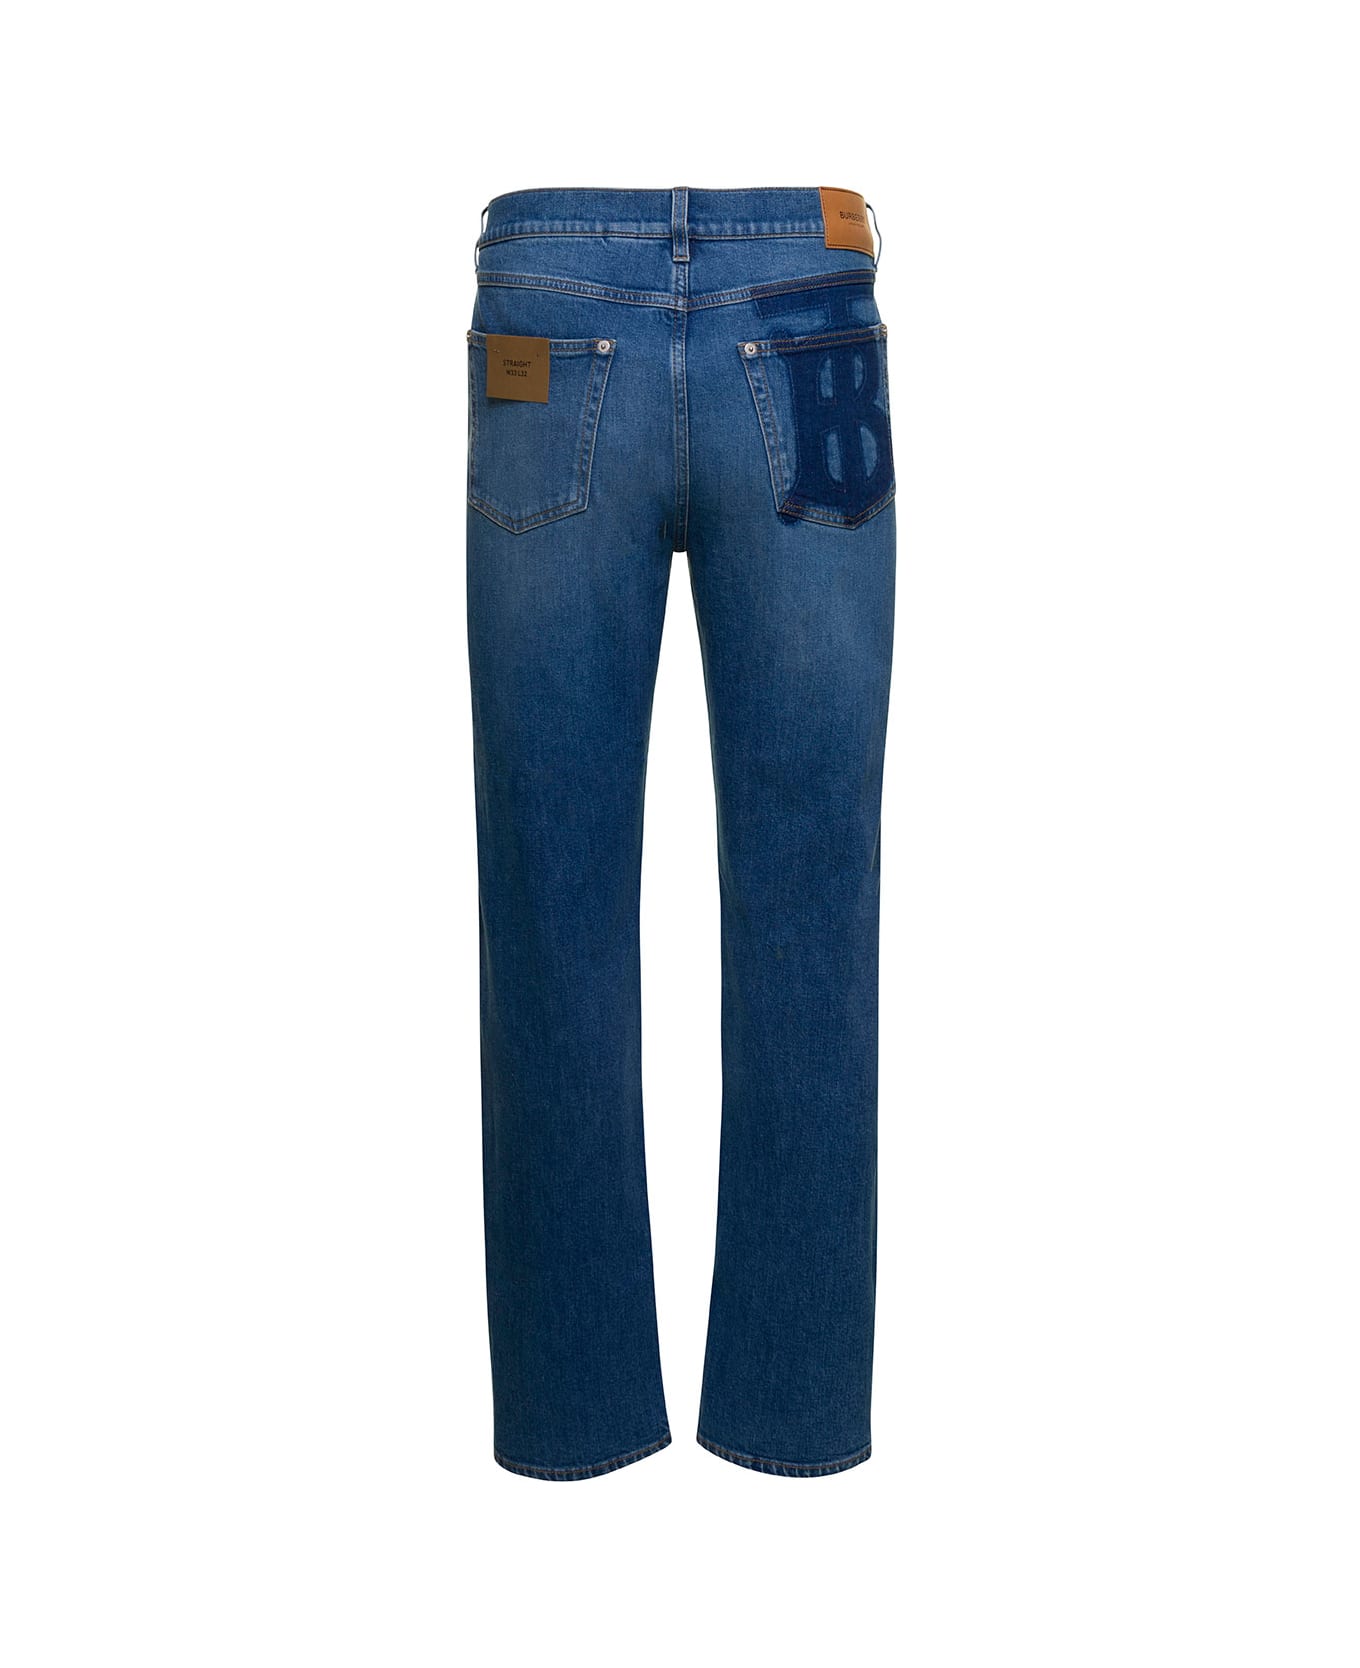 Burberry Blue Jeans With Tb Patch At The Back In Stretch Cotton Denim Man - Blu デニム